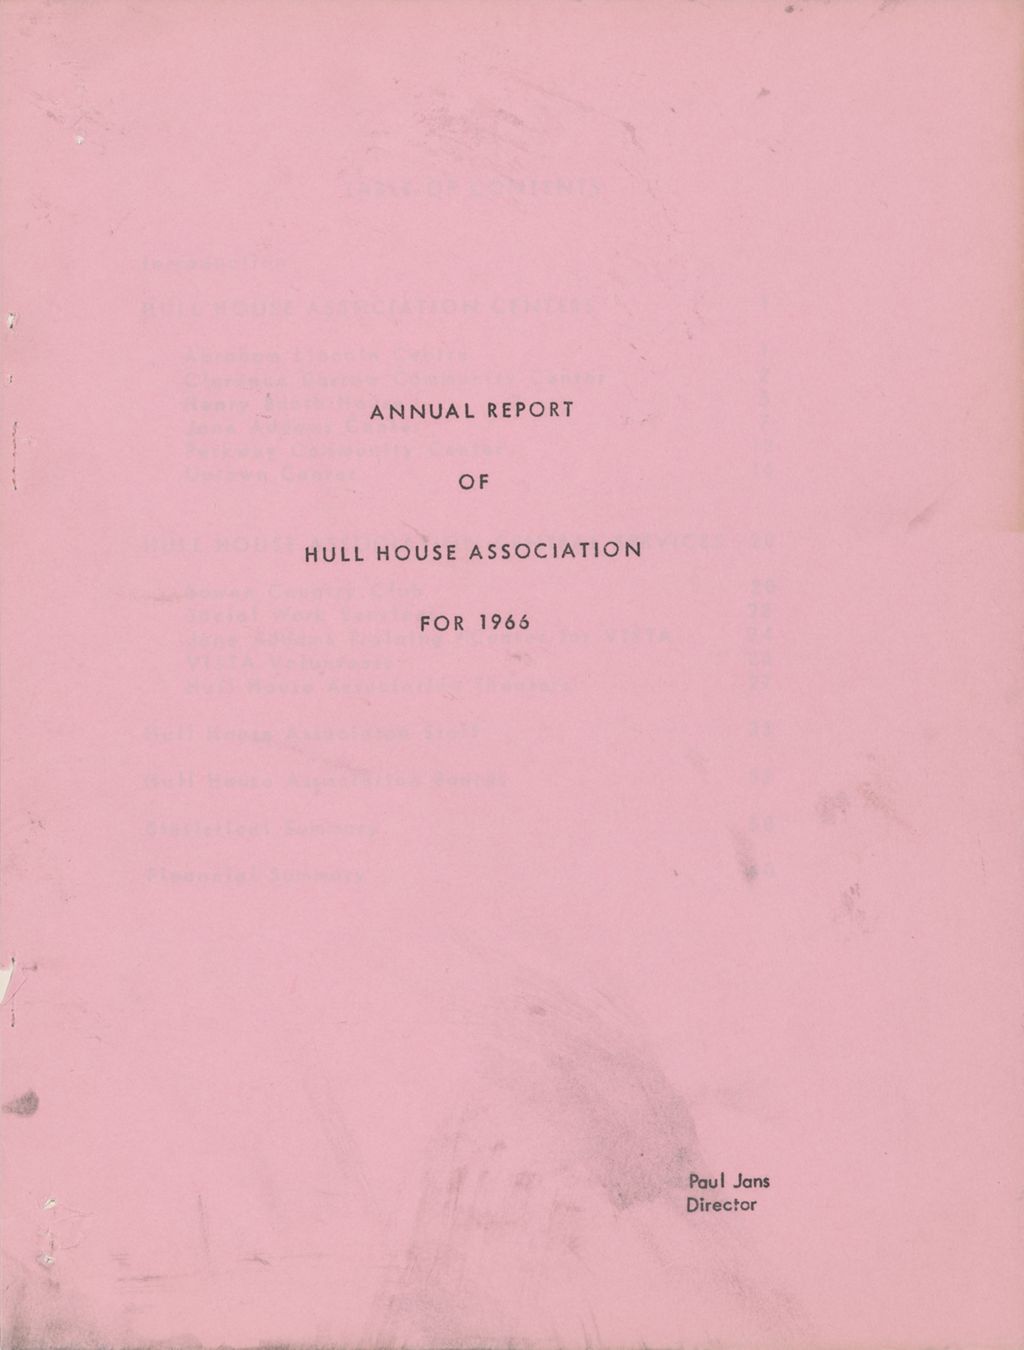 Hull House Association, Annual Report, 1966